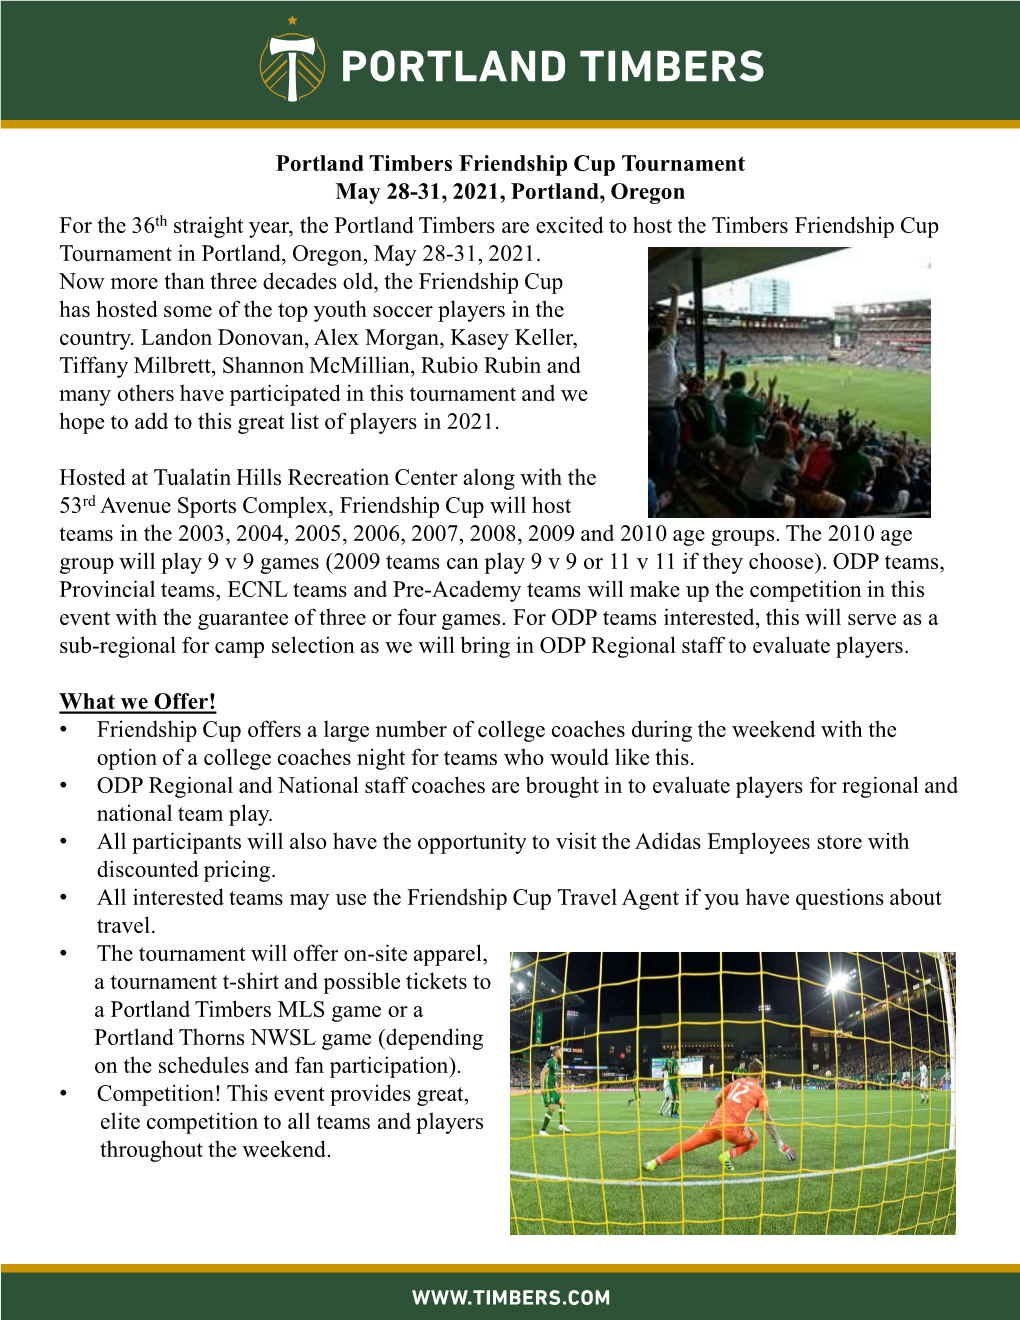 Portland Timbers Friendship Cup Tournament May 28-31, 2021